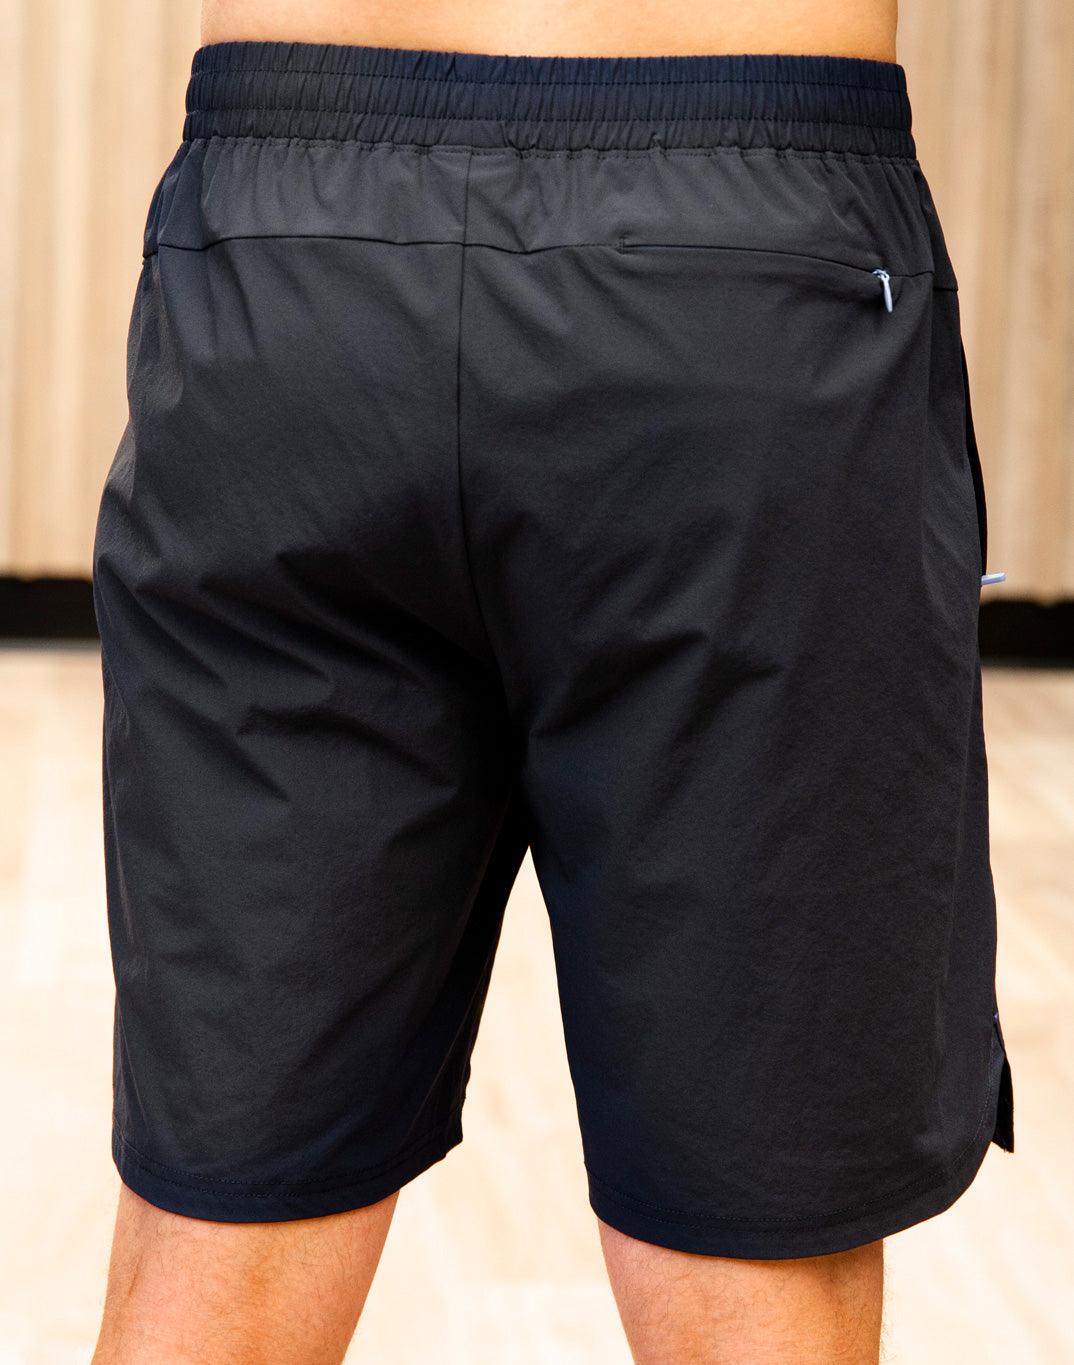 Kin Active 8" Shorts in Obsidian - Shorts - Gym+Coffee